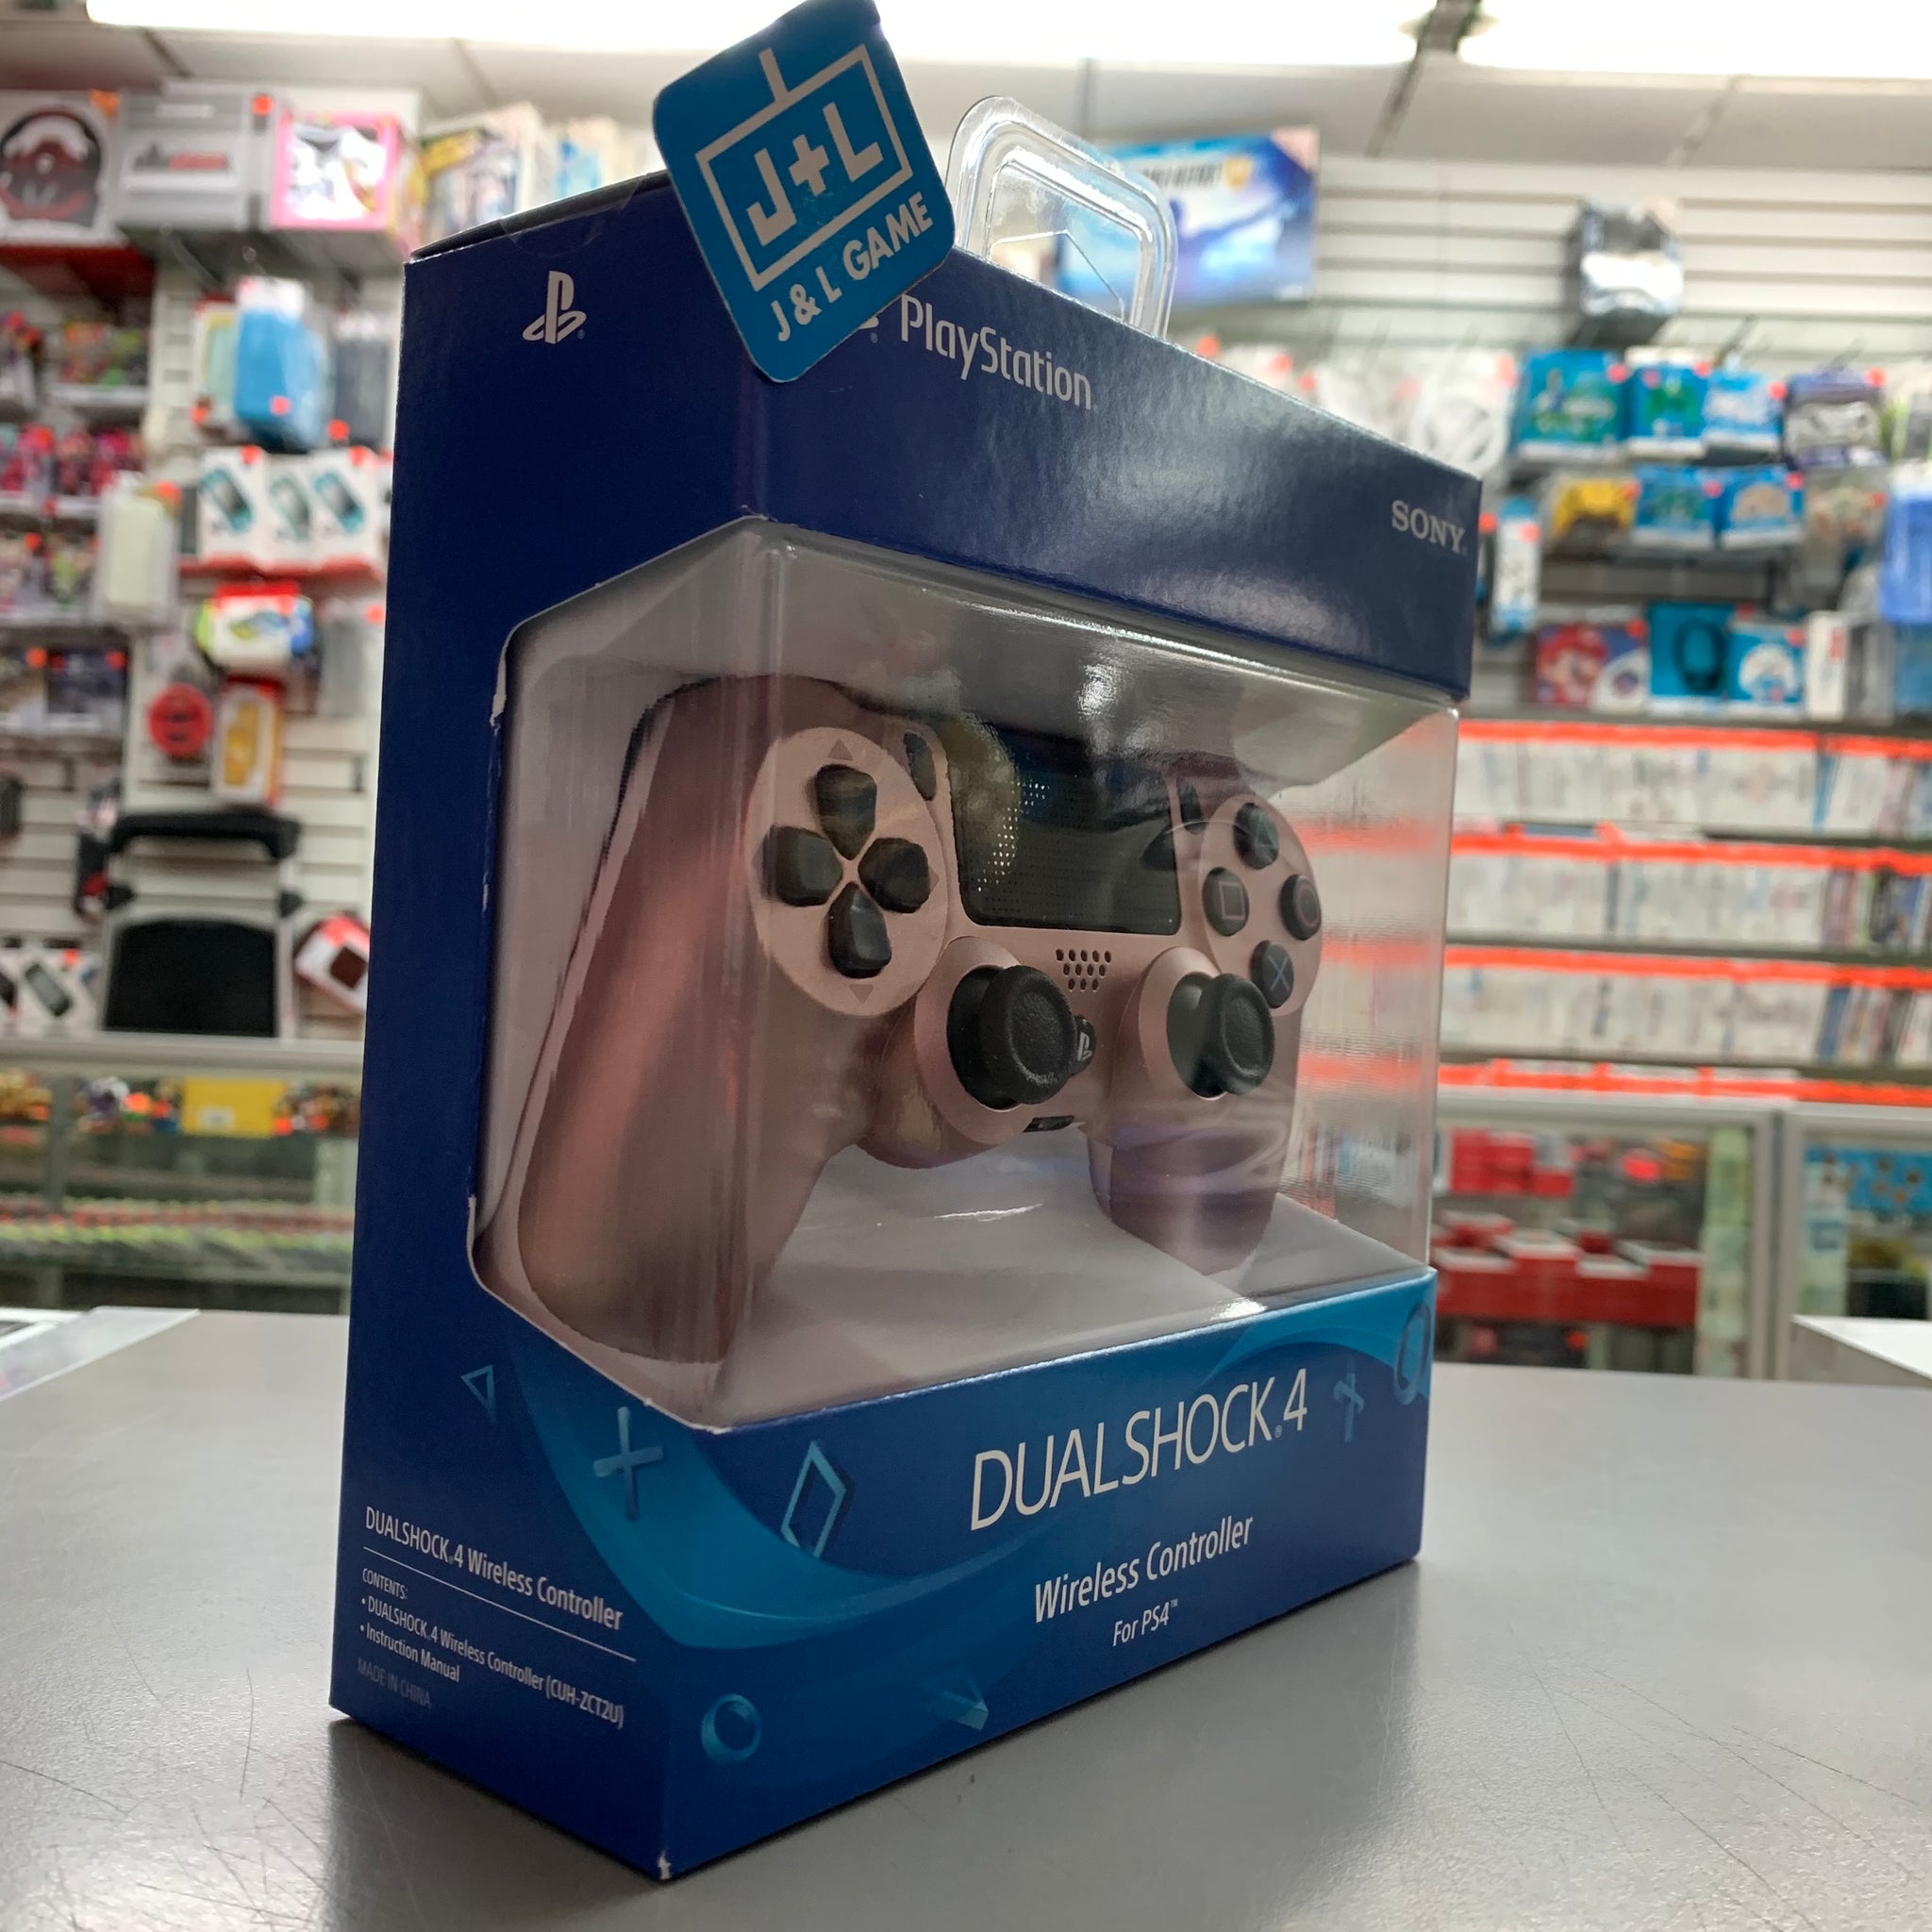 DualShock 4 Wireless Controller (Rose Gold) - (PS4) 4 – J&L Games New York City